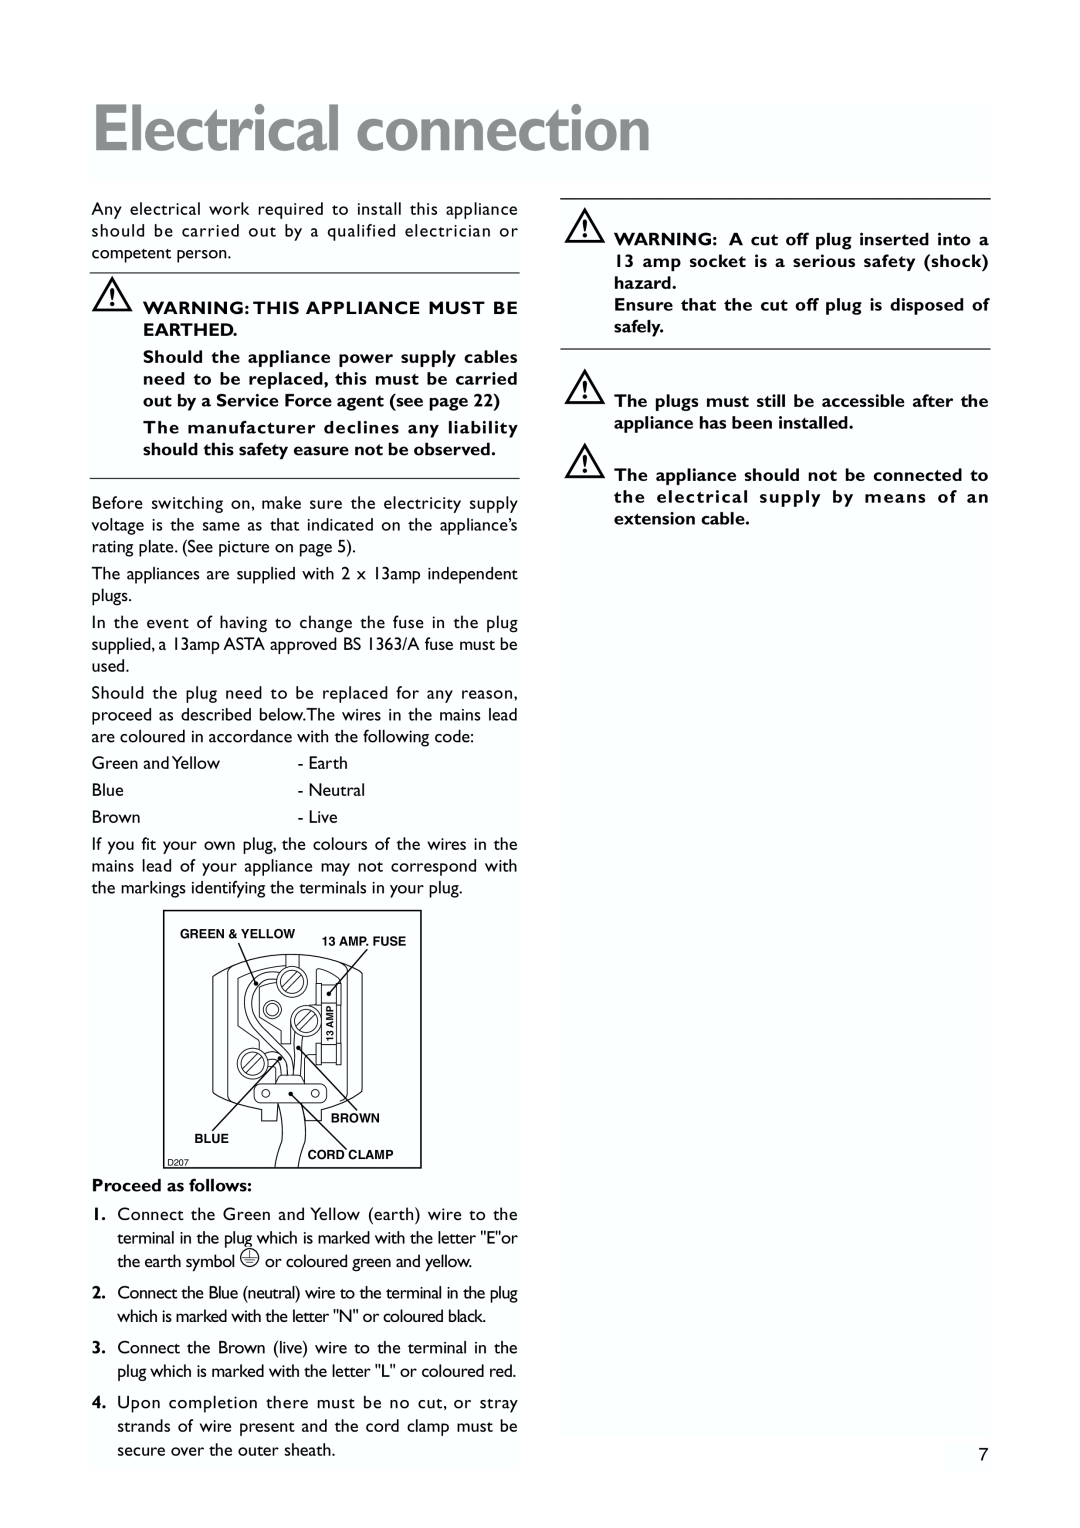 John Lewis JLWFF1101 instruction manual Electrical connection 